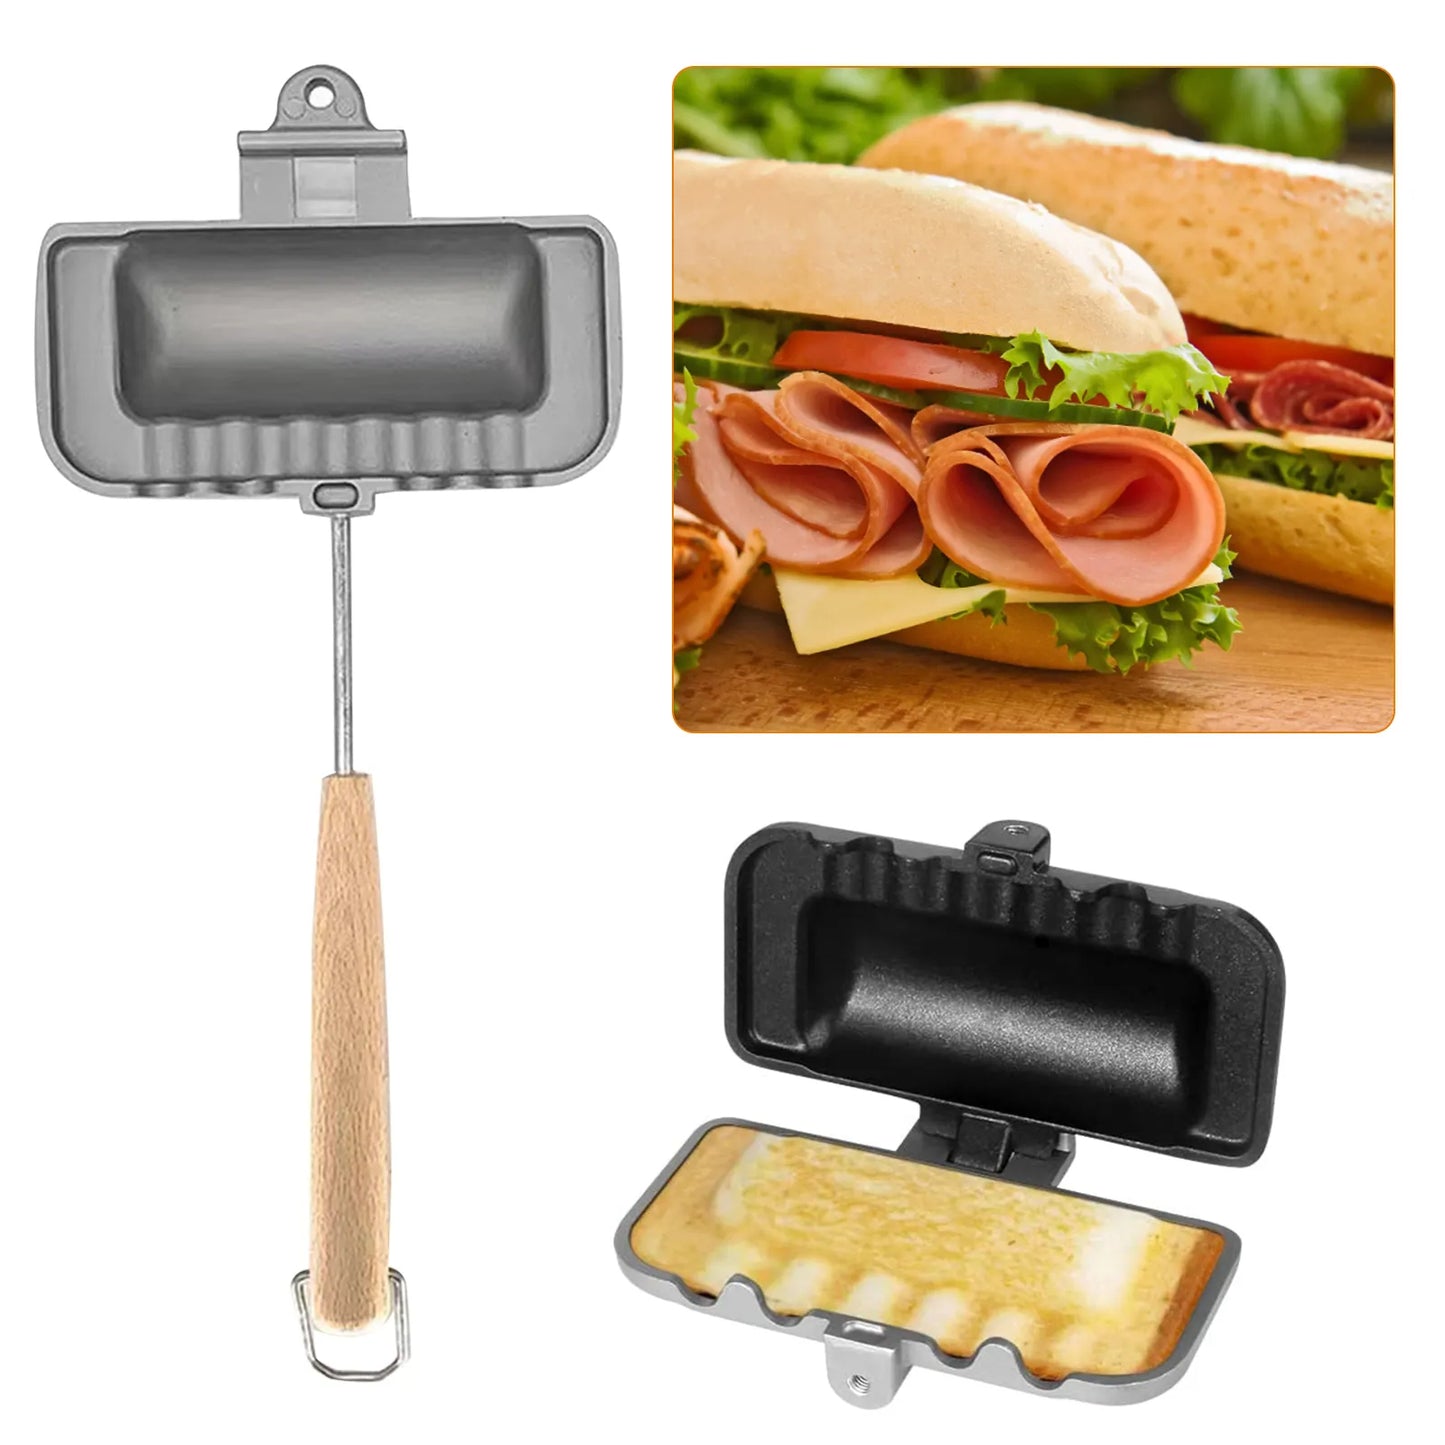 Double-Sided Non-Stick Foldable Sandwich Frying Pan Grill